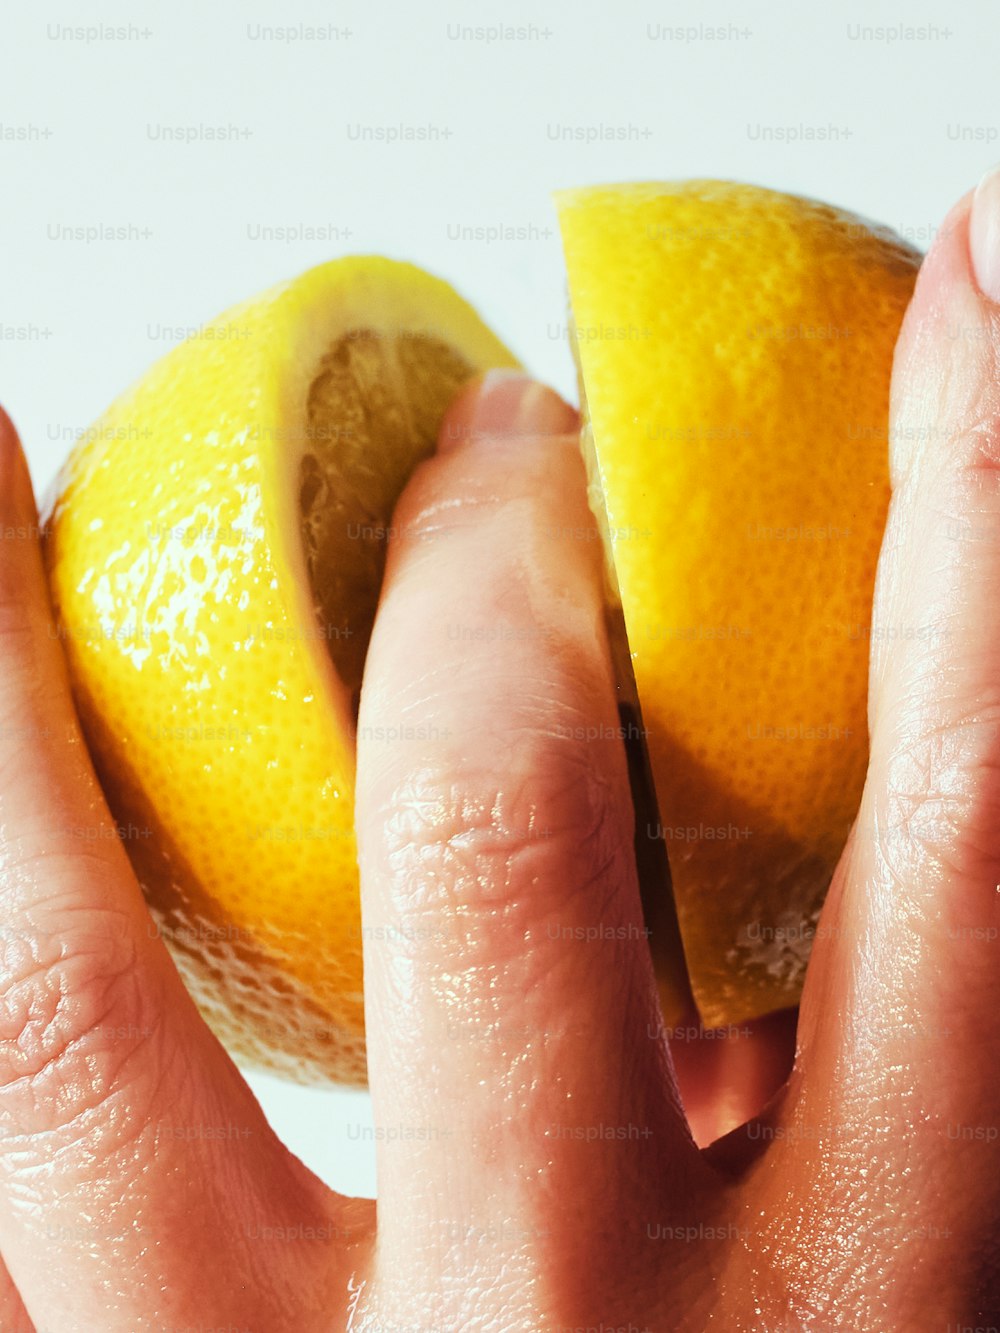 a close up of a person holding an orange